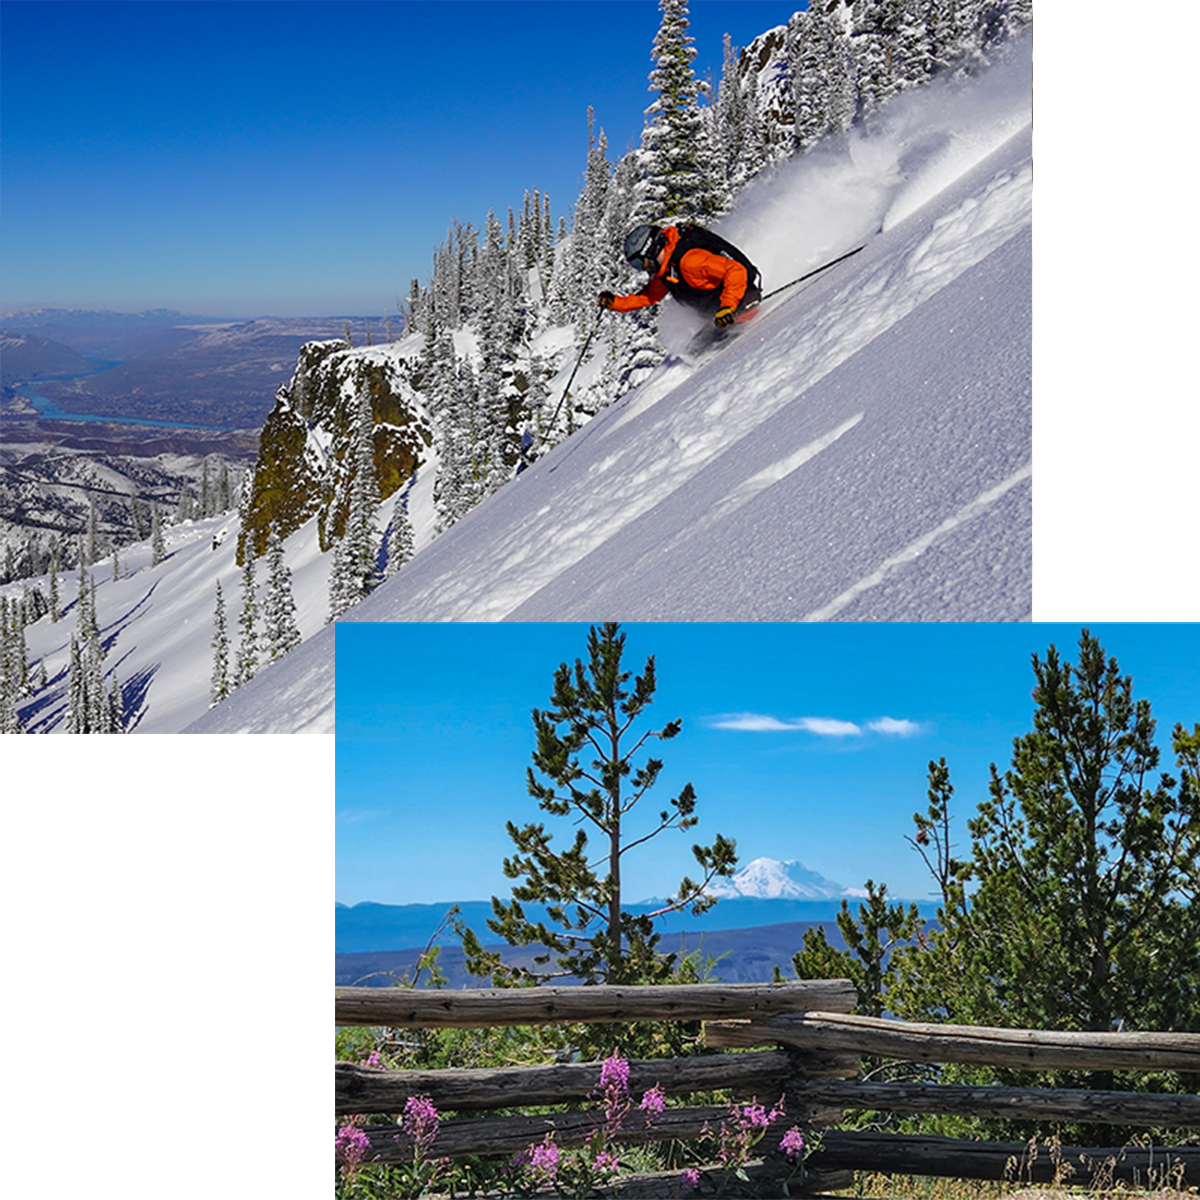 Photo collage of two images with a photo of a skier in orange jacket and black vest making deep powder turn at Mission RIdge with river view below under a photo of Mt. Rainier as seen from the summit of Mission Ridge during the summer.